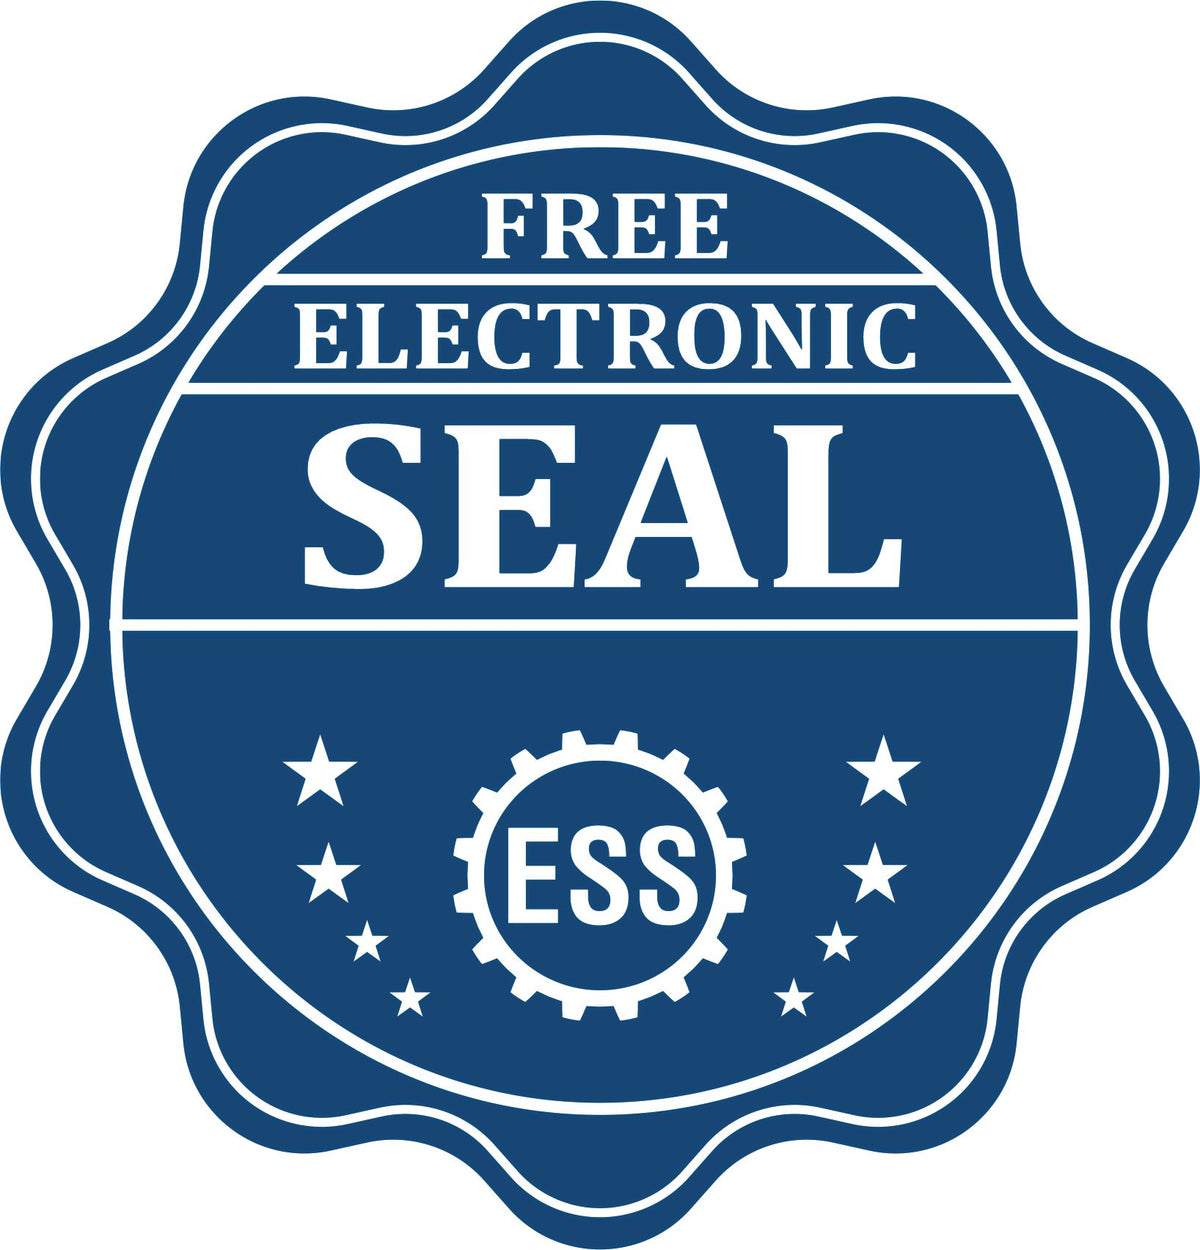 A badge showing a free electronic seal for the Premium MaxLight Pre-Inked Ohio Engineering Stamp with stars and the ESS gear on the emblem.